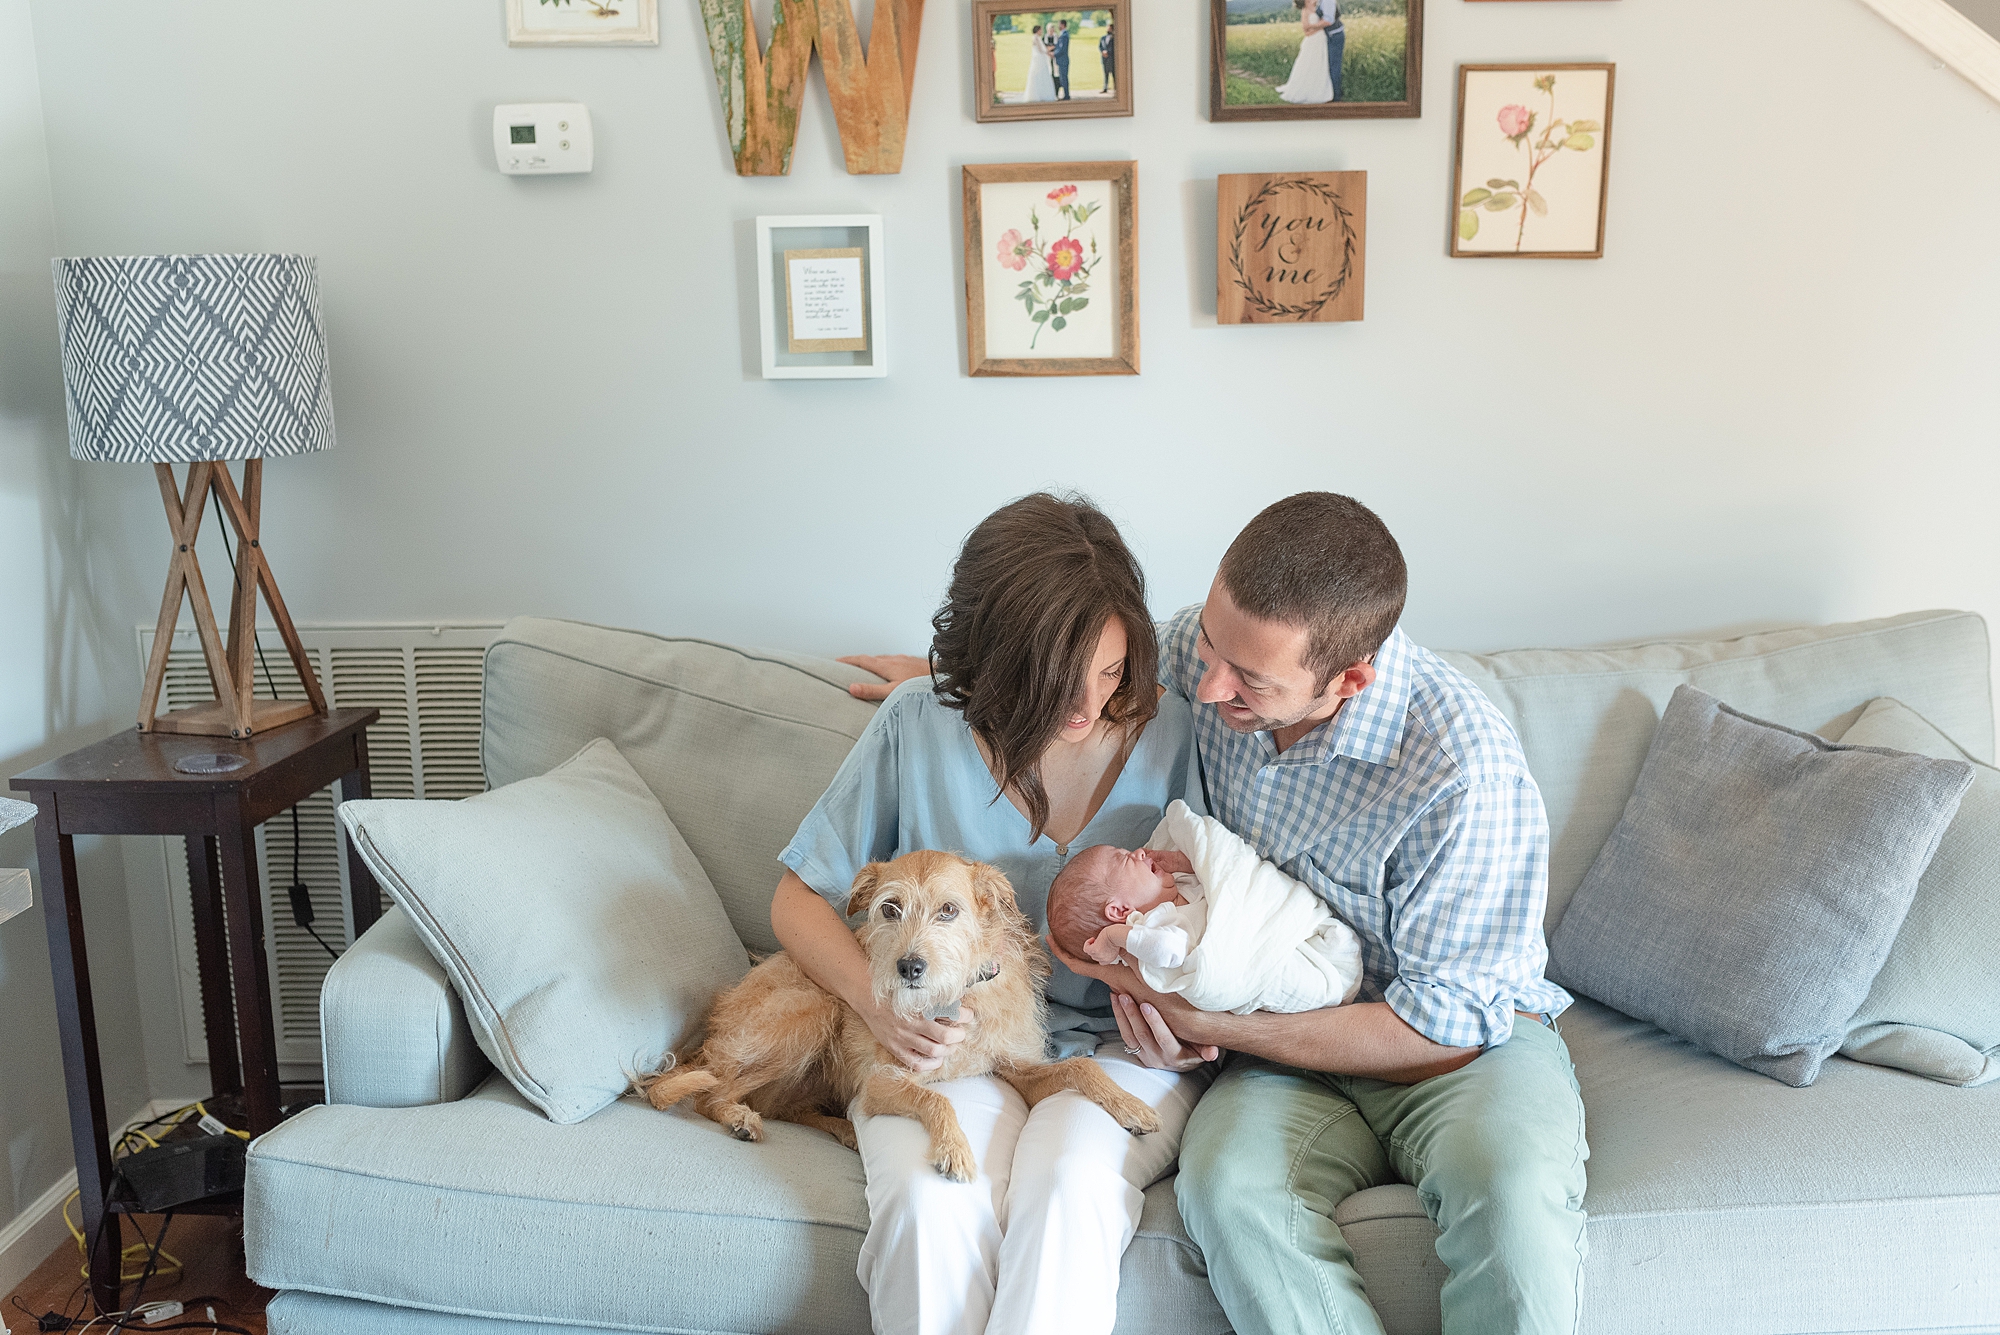 Family of three with the family dog are getting their family portraits taken in the living room of their home and the living room walls have national parks as decor